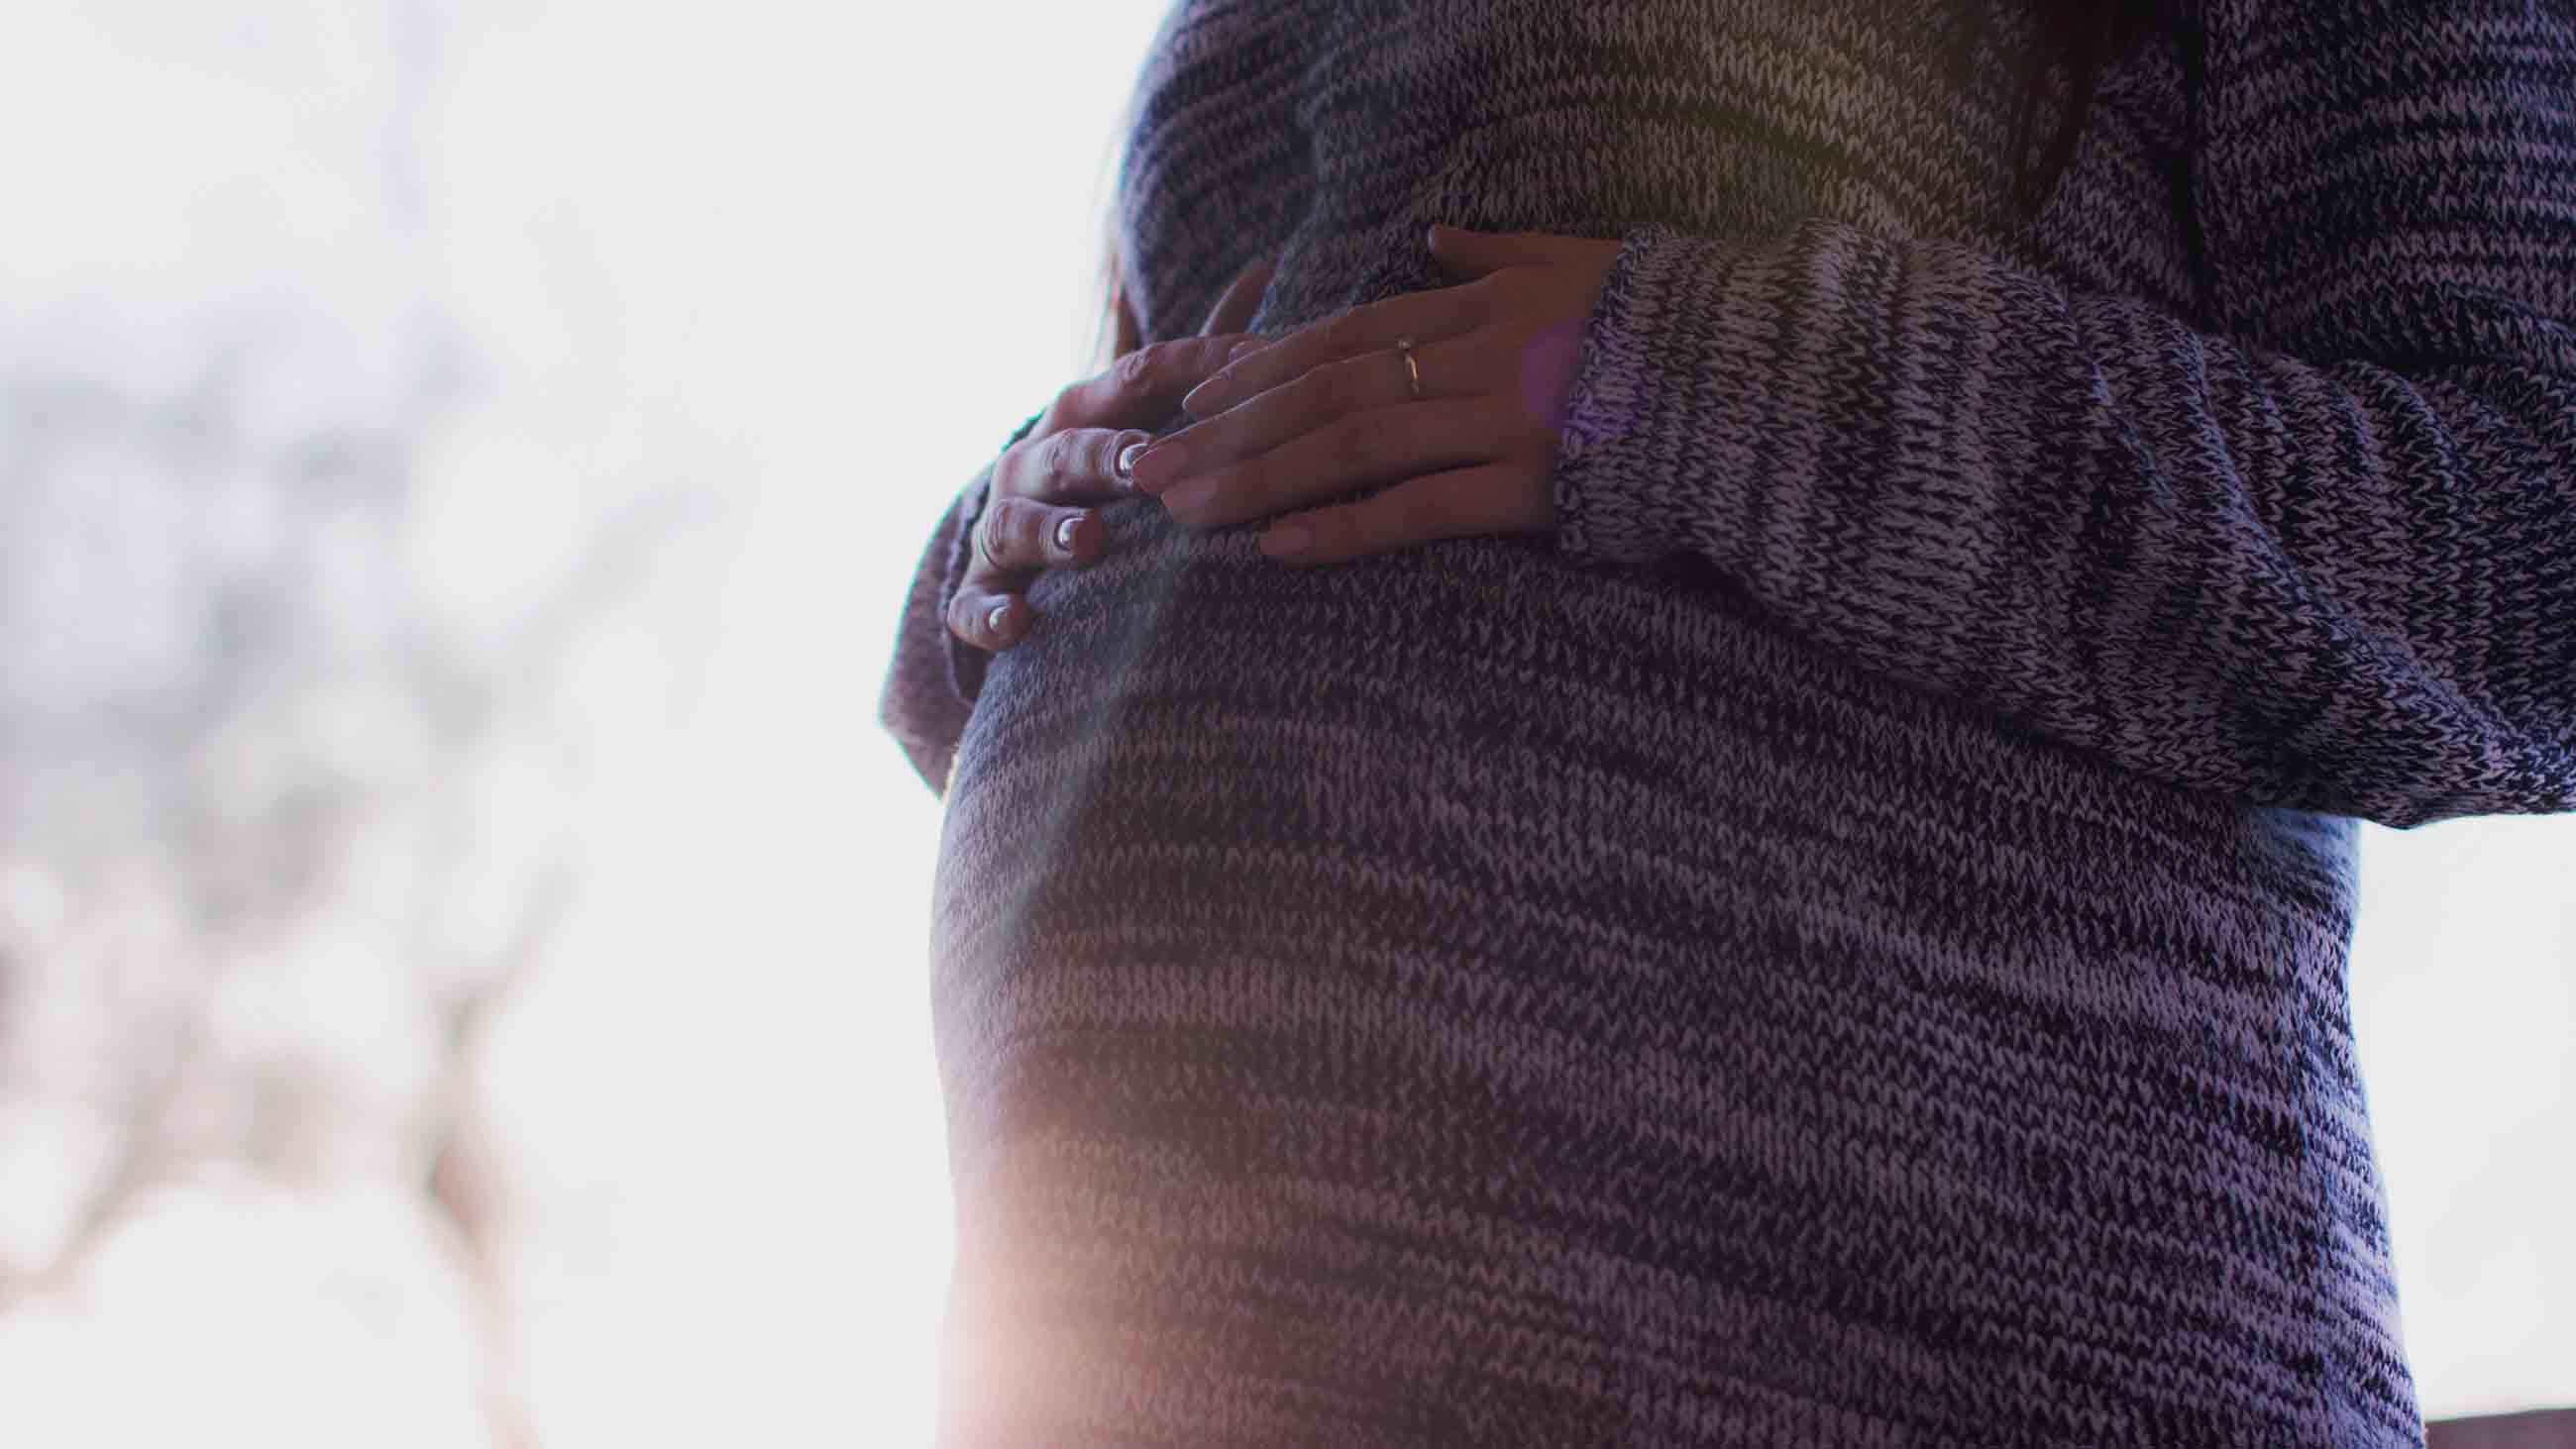 Last week, Big Horn County Attorney Jay Harris announced a proposal to issue restraining orders compelling women who use non-prescribed drugs and alcohol during pregnancy to stop.